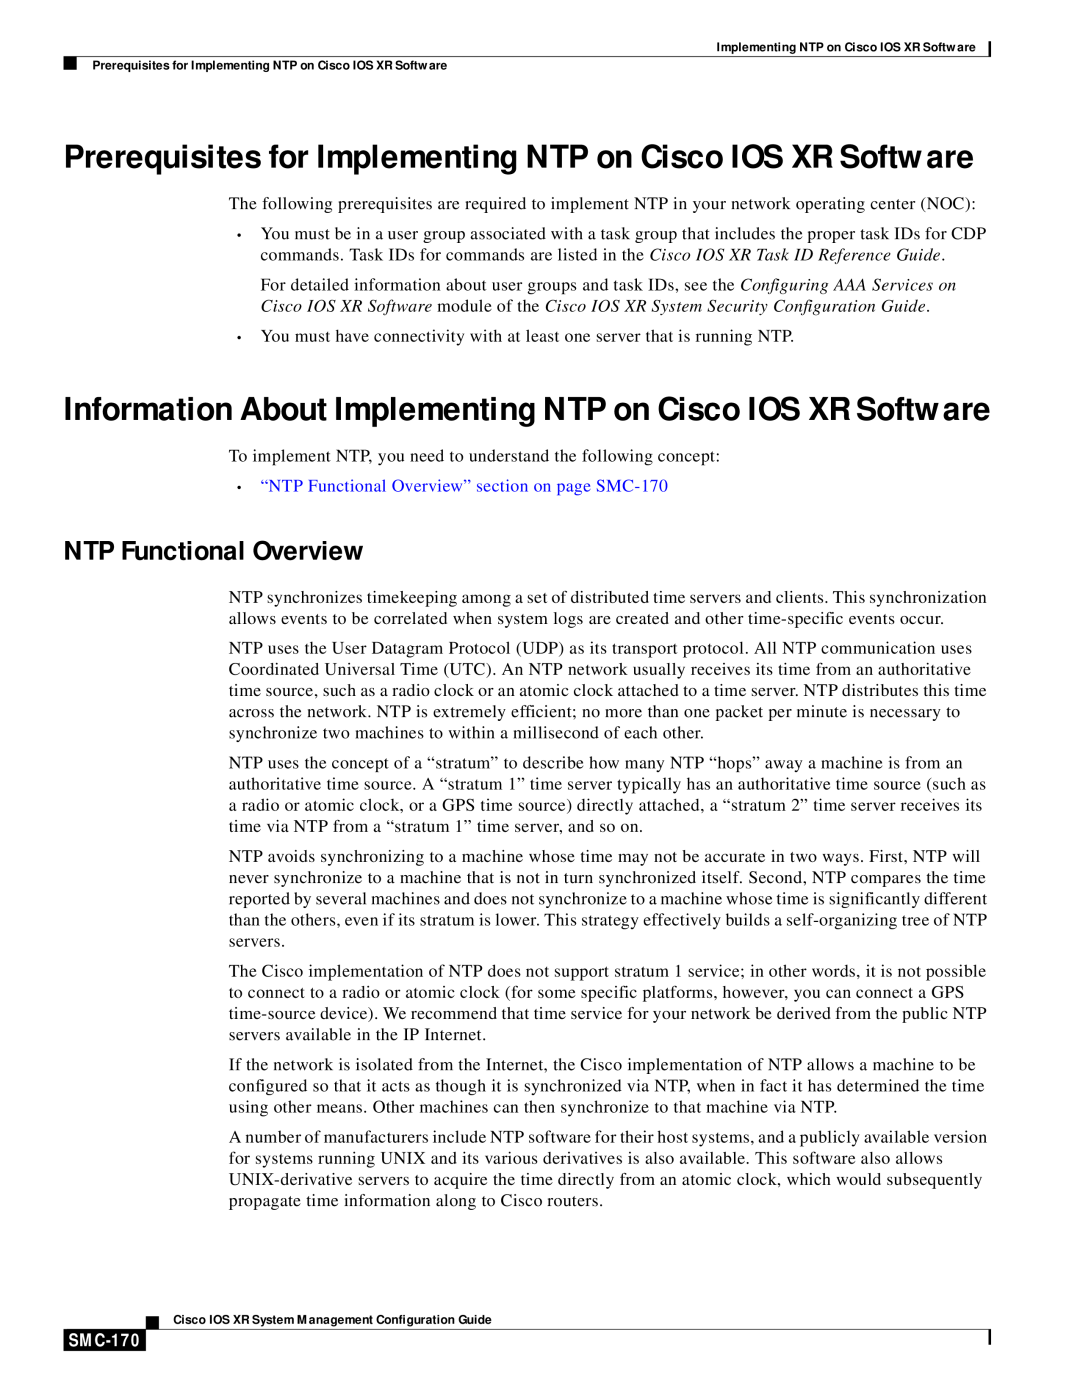 Cisco Systems SMC-169 manual NTP Functional Overview, SMC-170, Prerequisites for Implementing NTP on Cisco IOS XR Software 